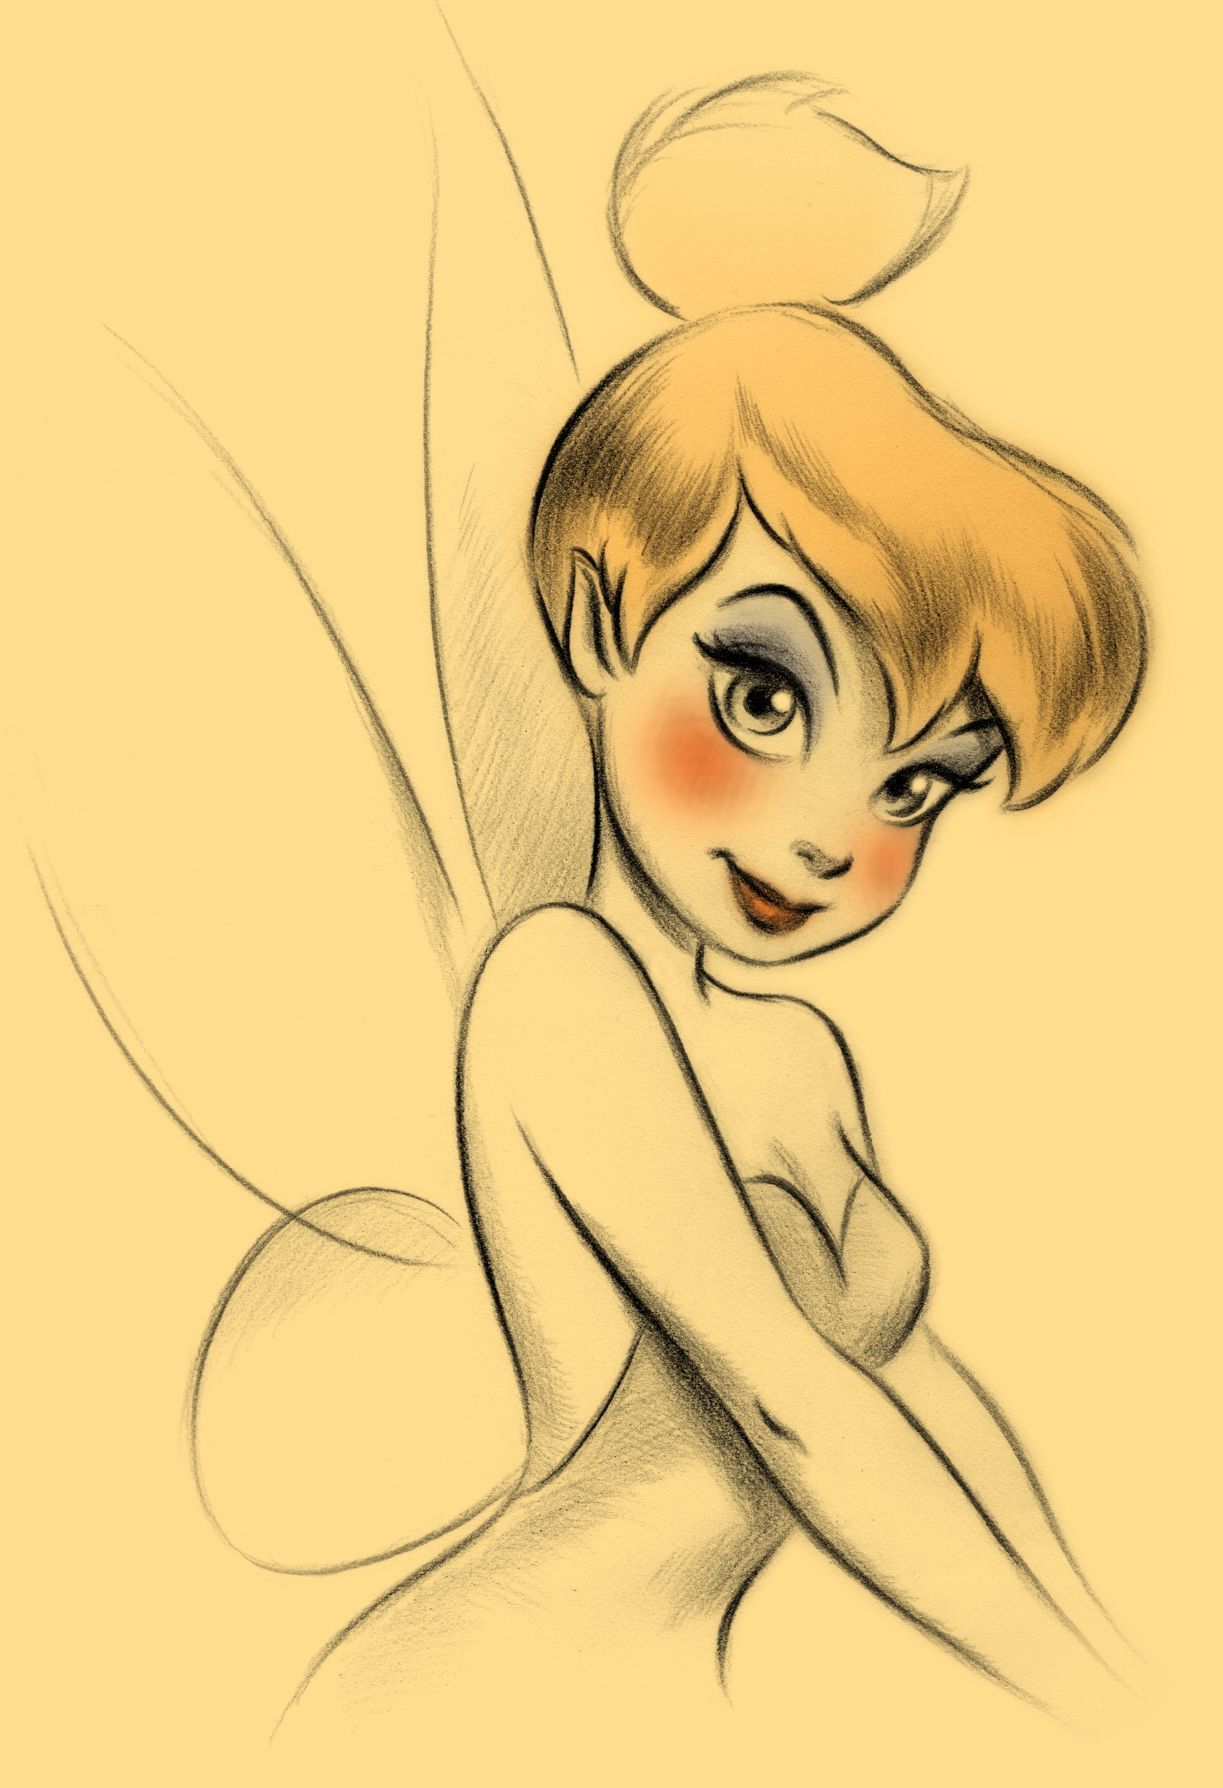 Tinkerbell by Pedro Astudillo would be a cute tattoo